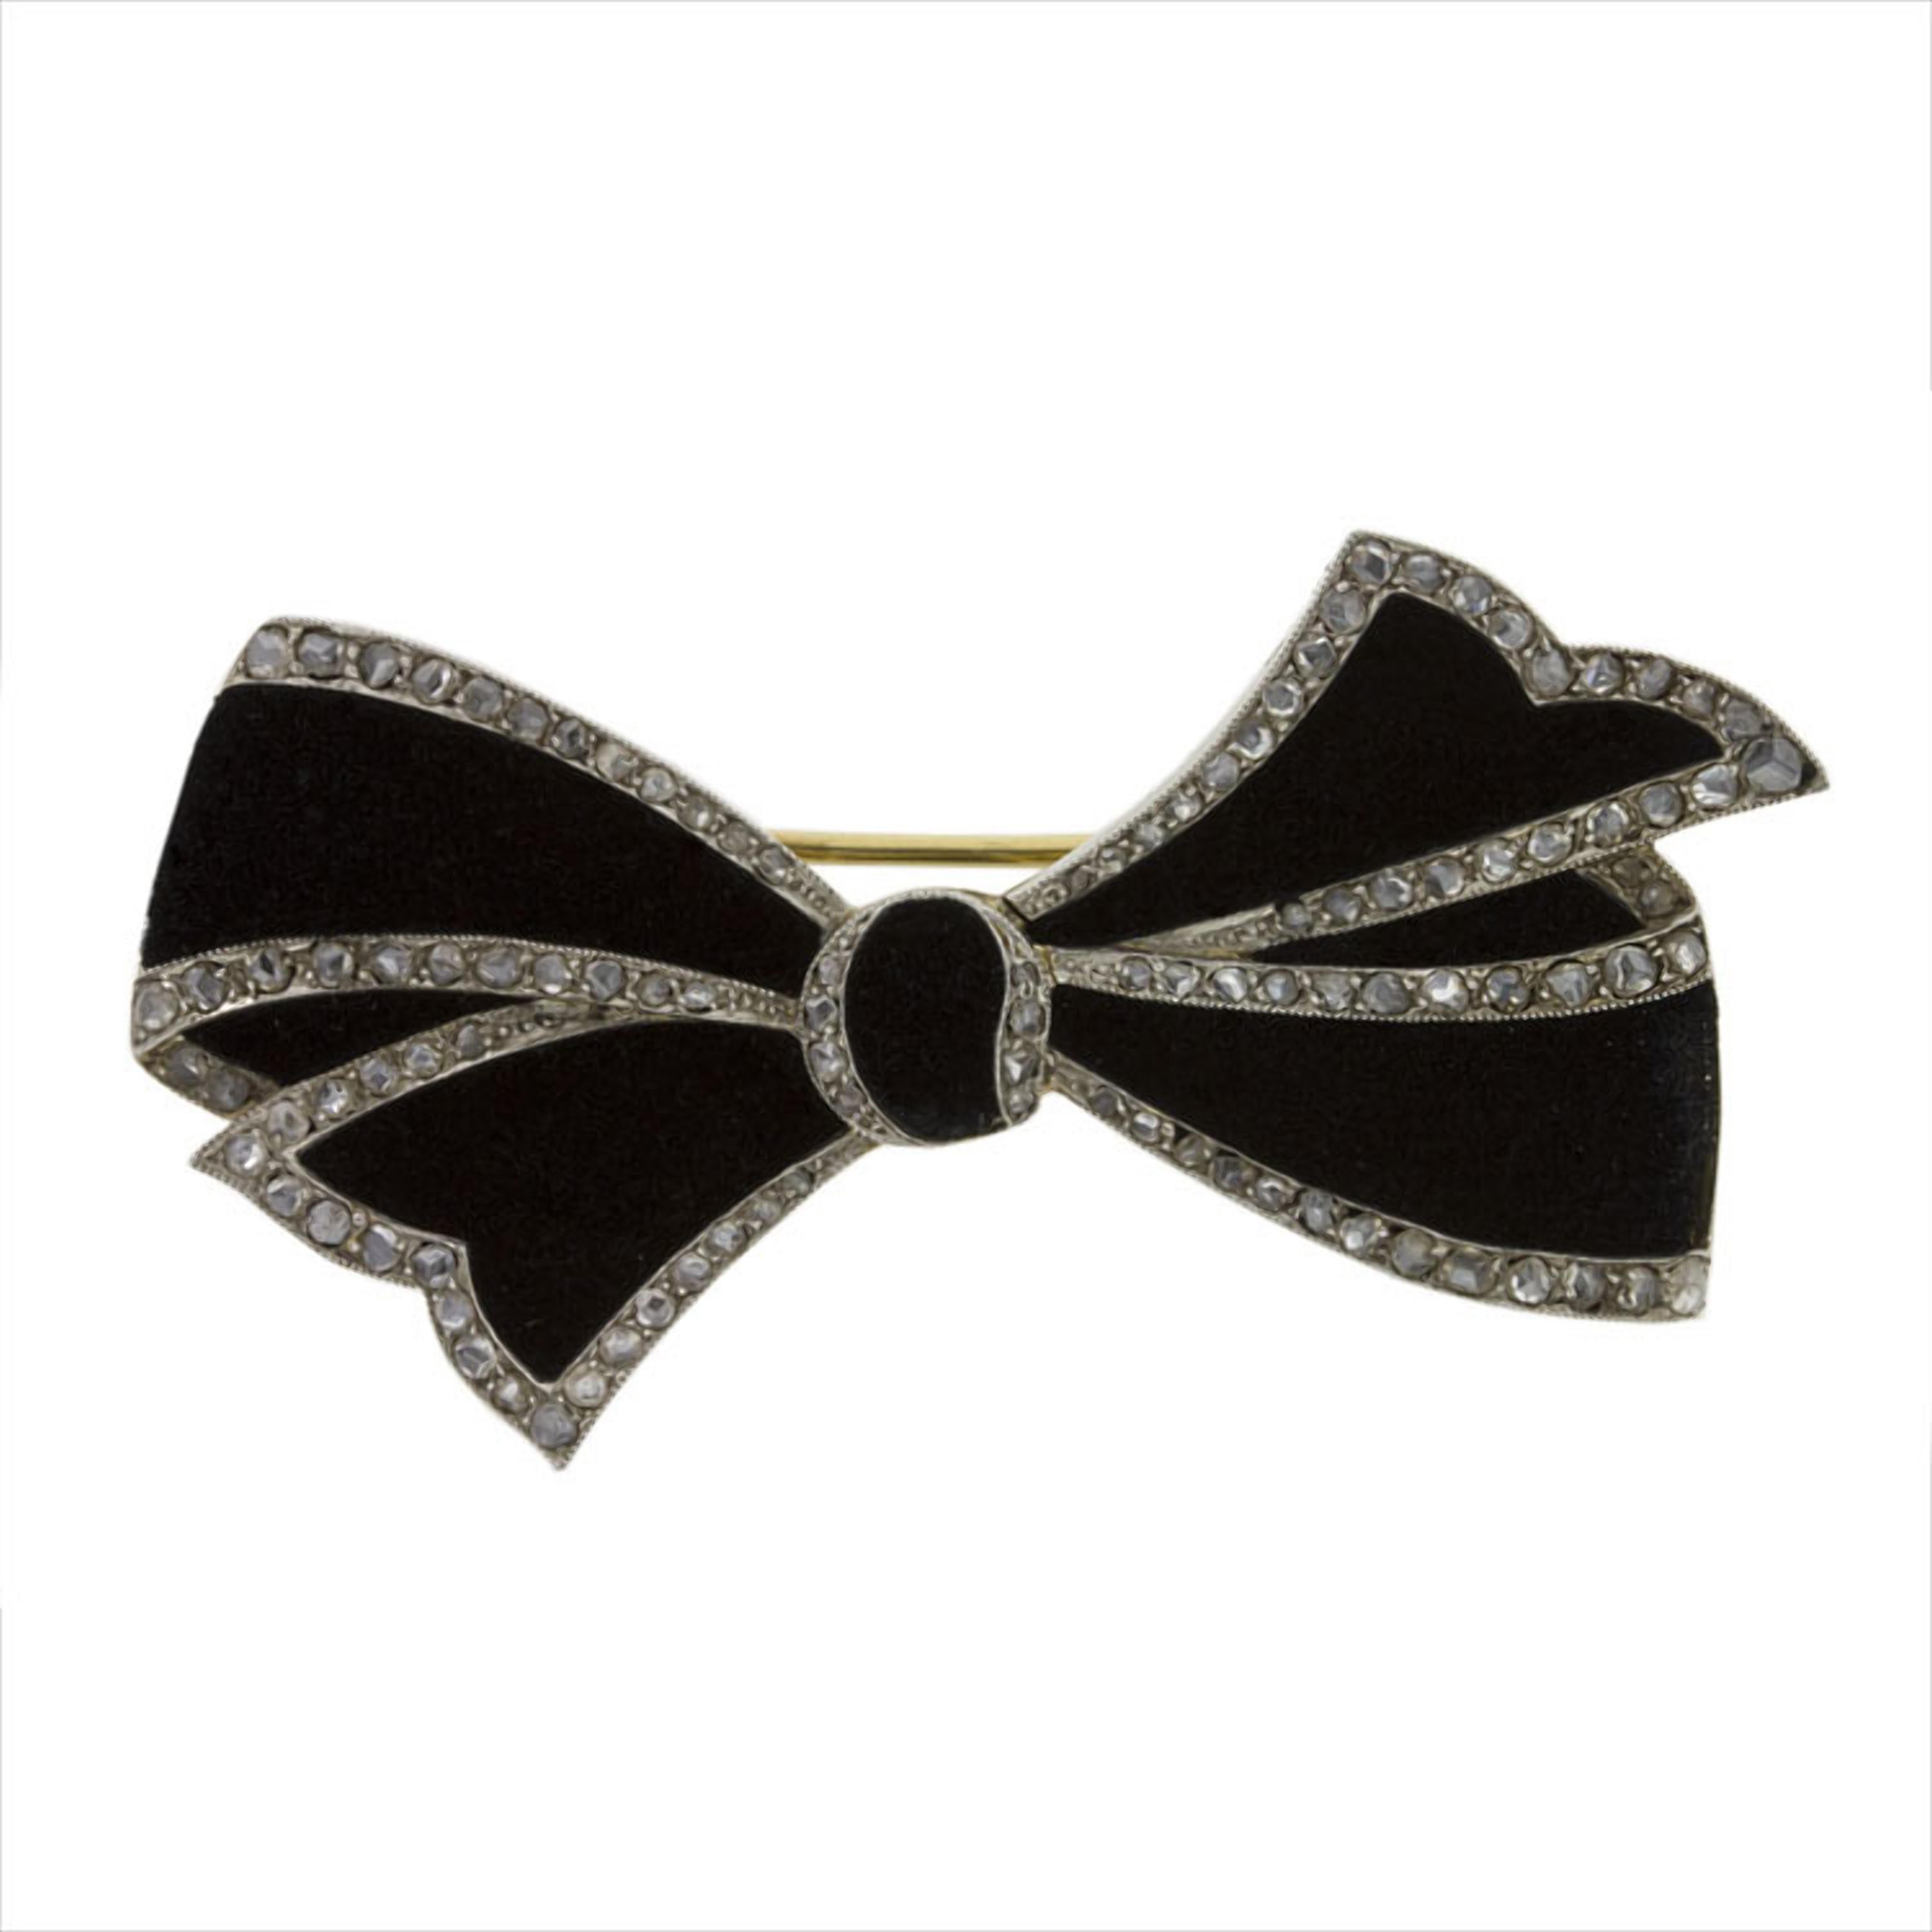 A Belle Epoque diamond bow brooch, the brooch in the form of a tied ribbon bow in black velvet, with rose-cut diamond-set platinum border and yellow gold back, bearing French gold marks and partial maker’s attributed of Cartier, circa 1910,